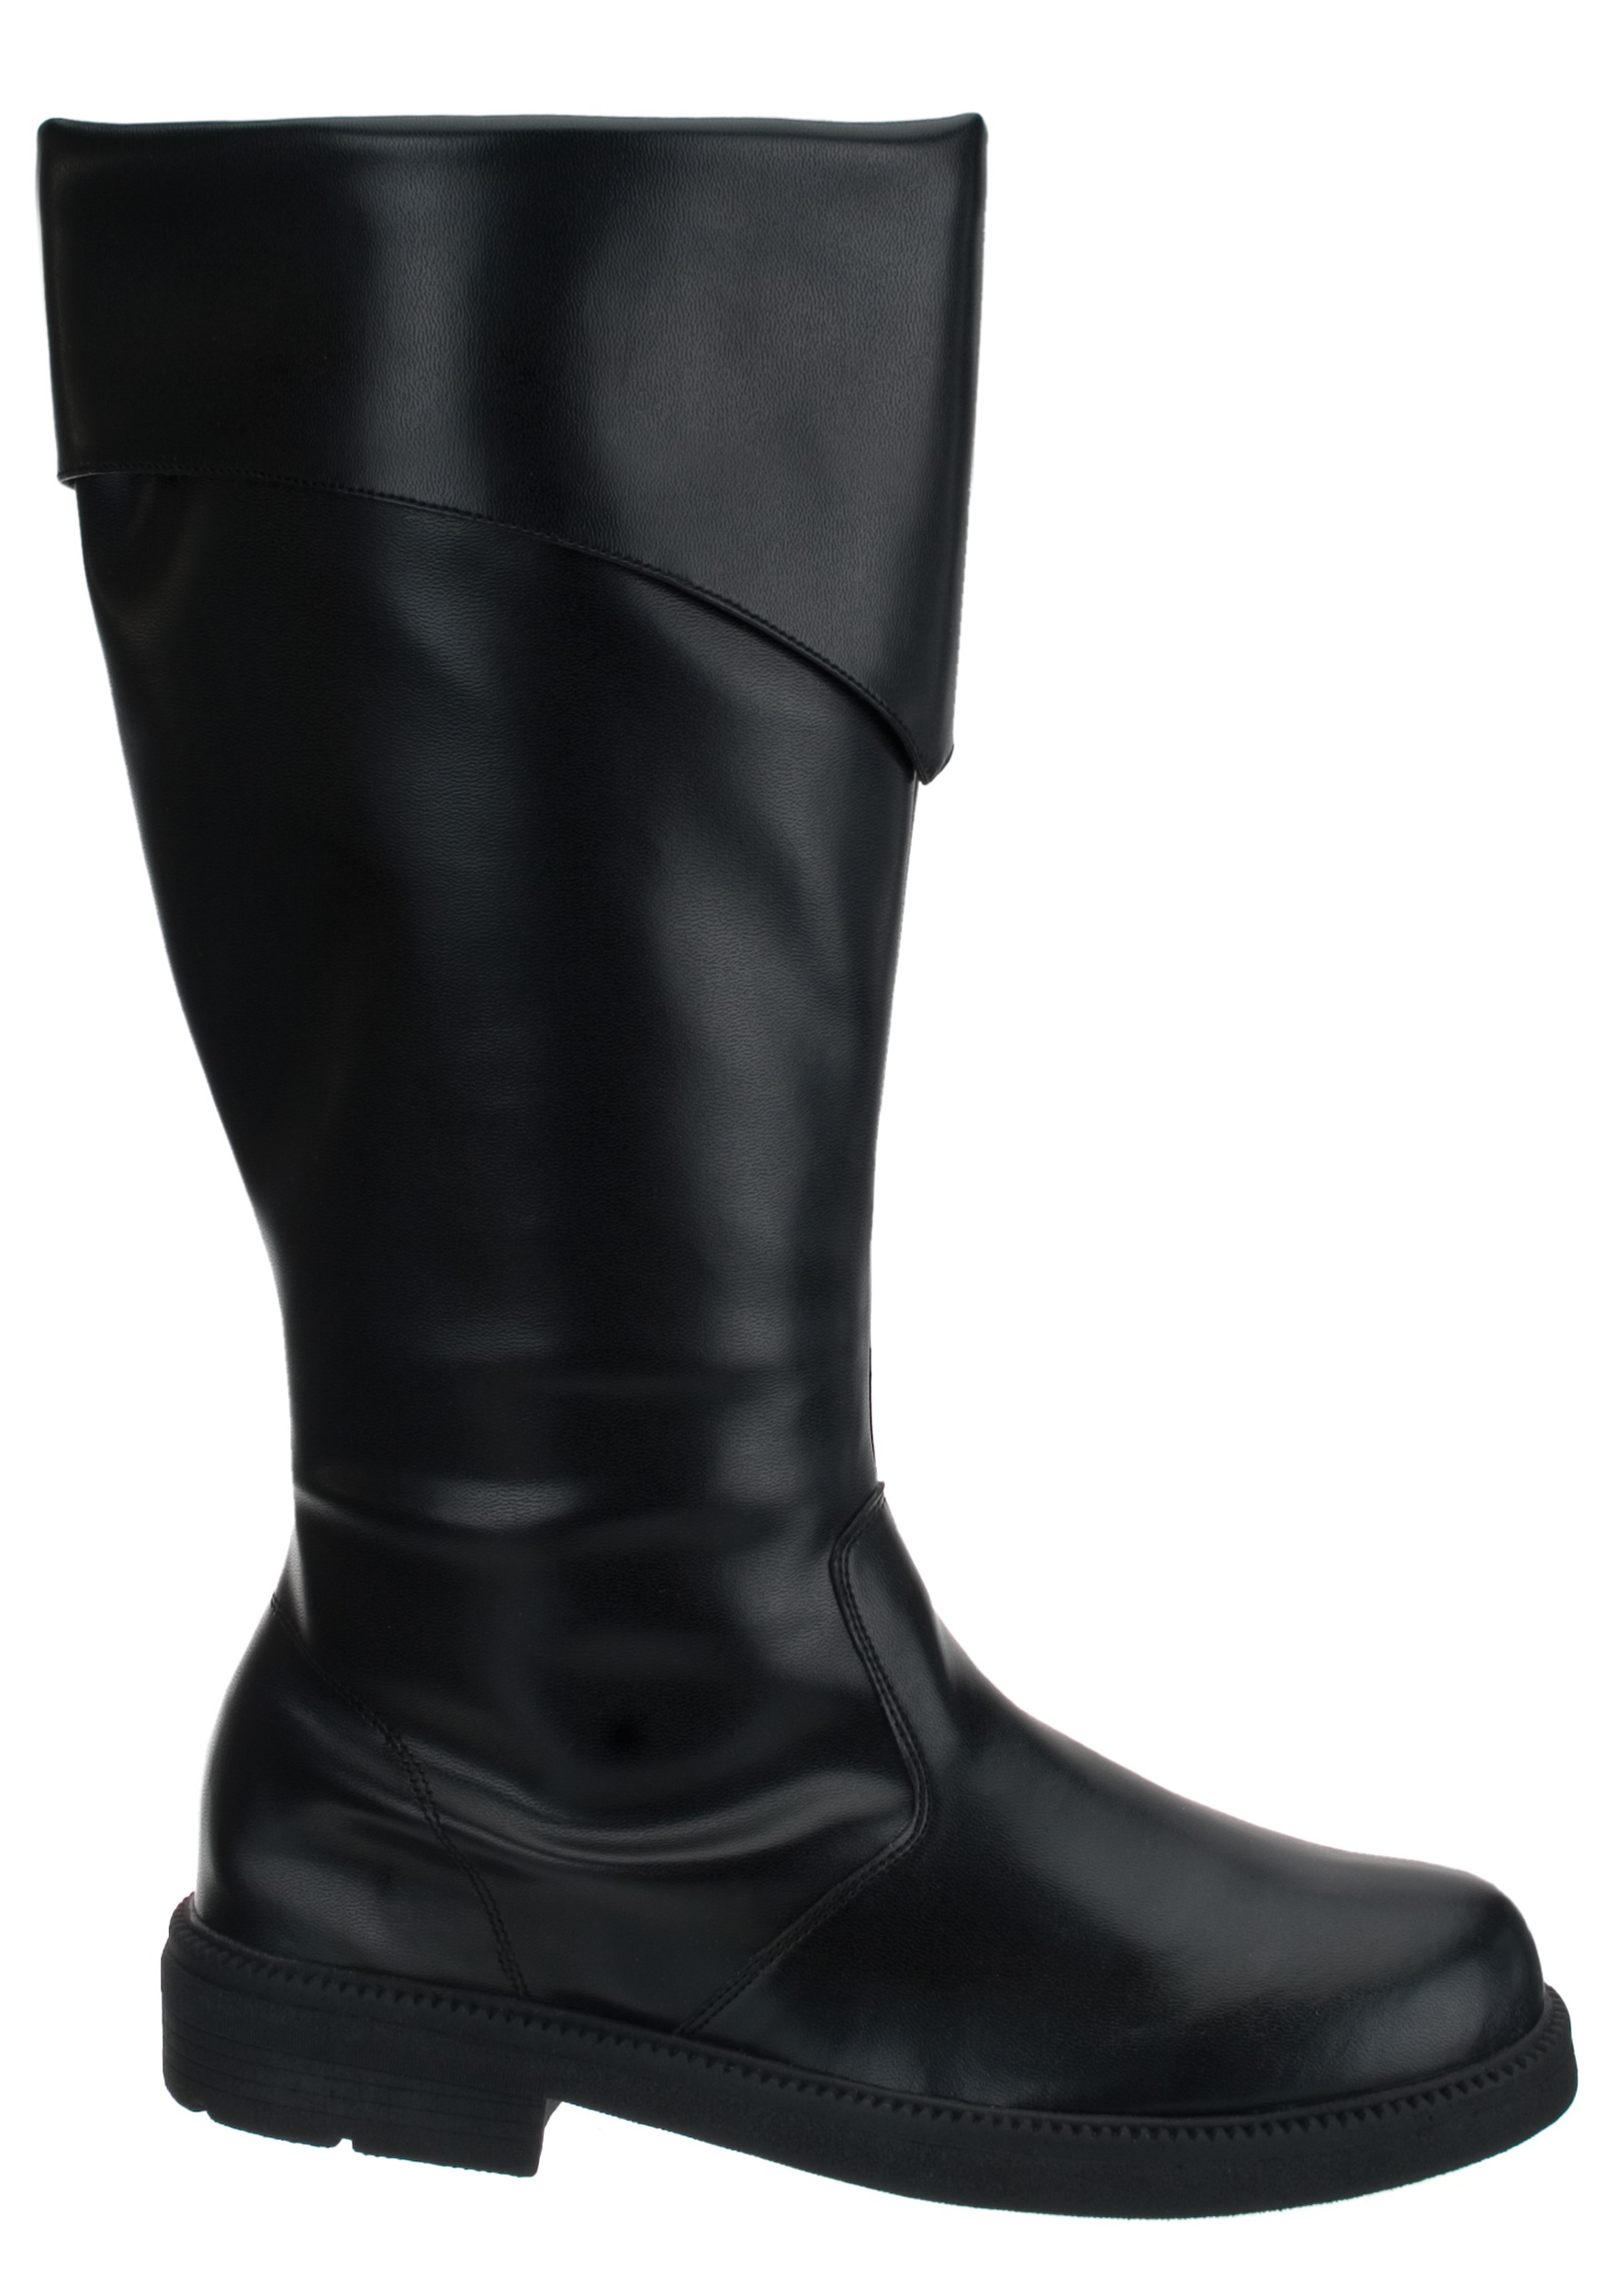 Tall Cuffed Black Costume Boots for Men